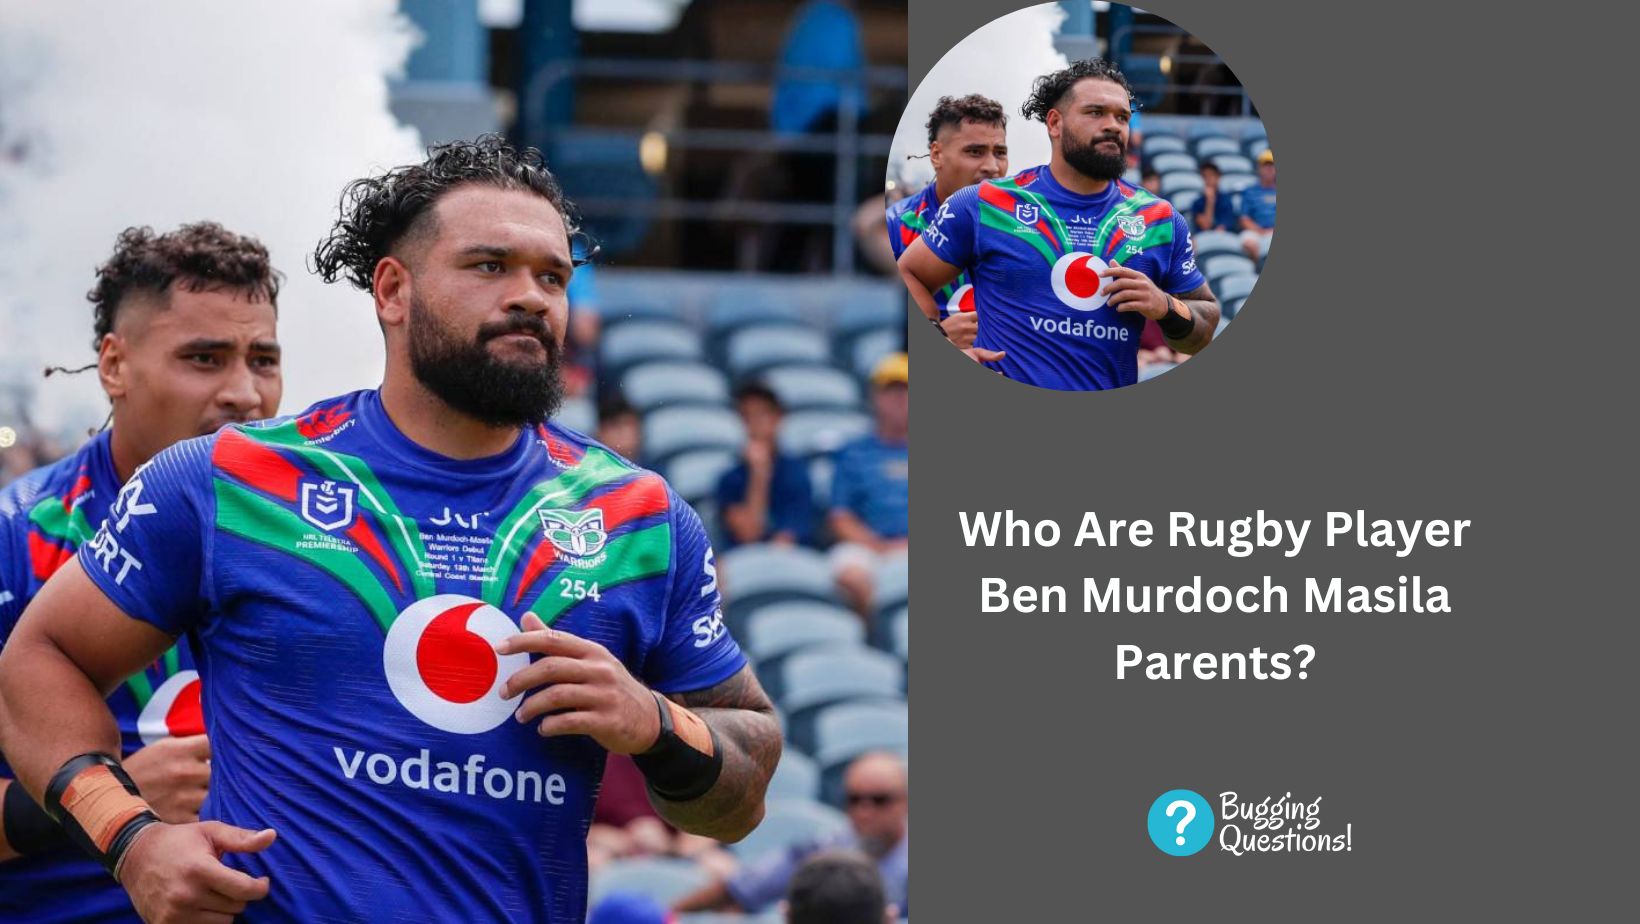 Who Are Rugby Player Ben Murdoch Masila Parents?